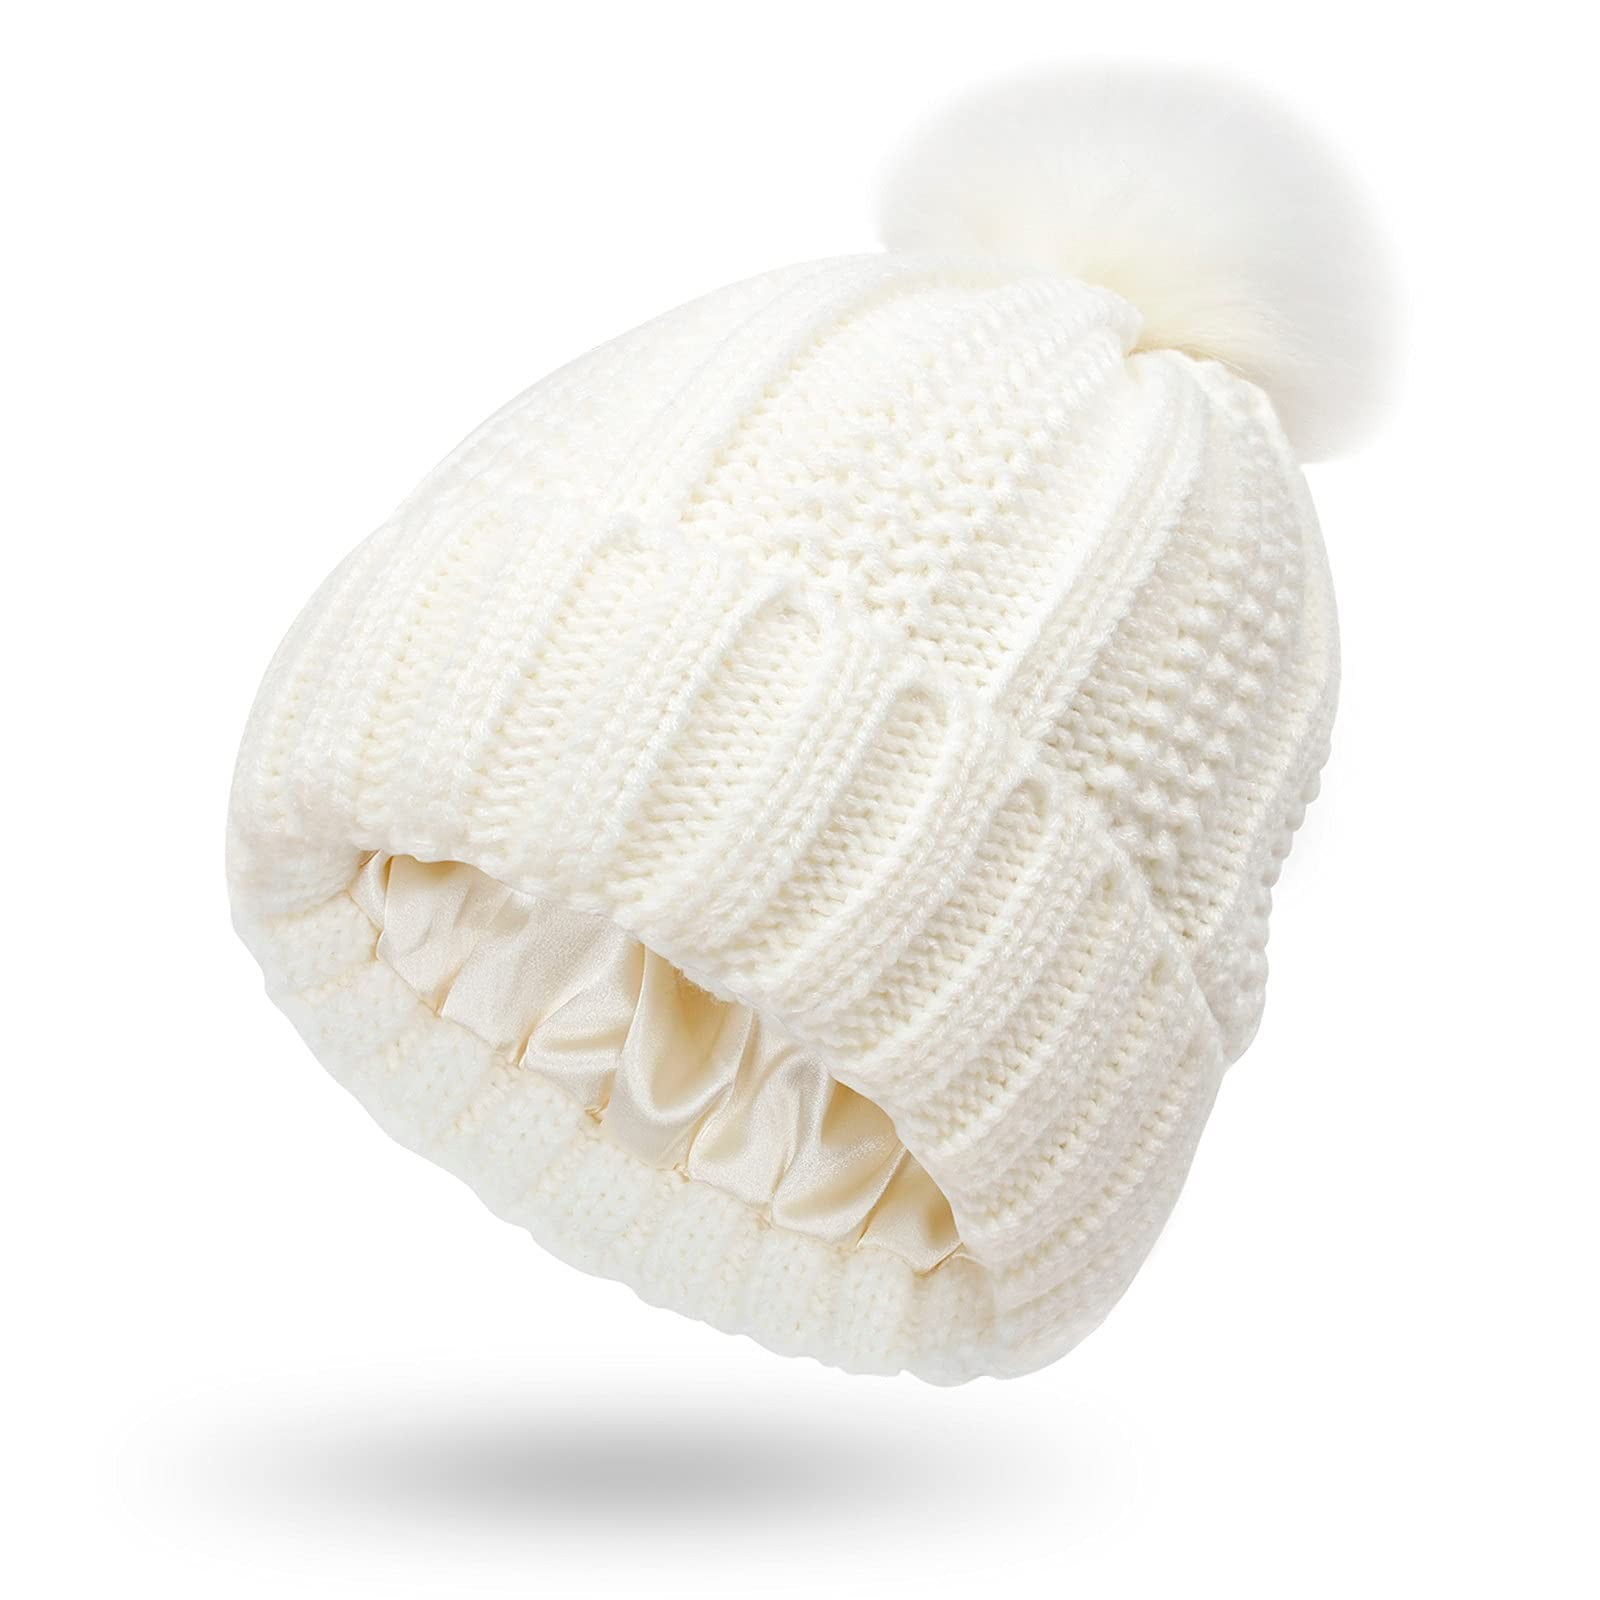 Kddylitq Beanie Light Faux Fur Pompom Furry Hat Cable Knit Chunky Classic Winter Soft Pompom White Free size, Women's, Size: One Size